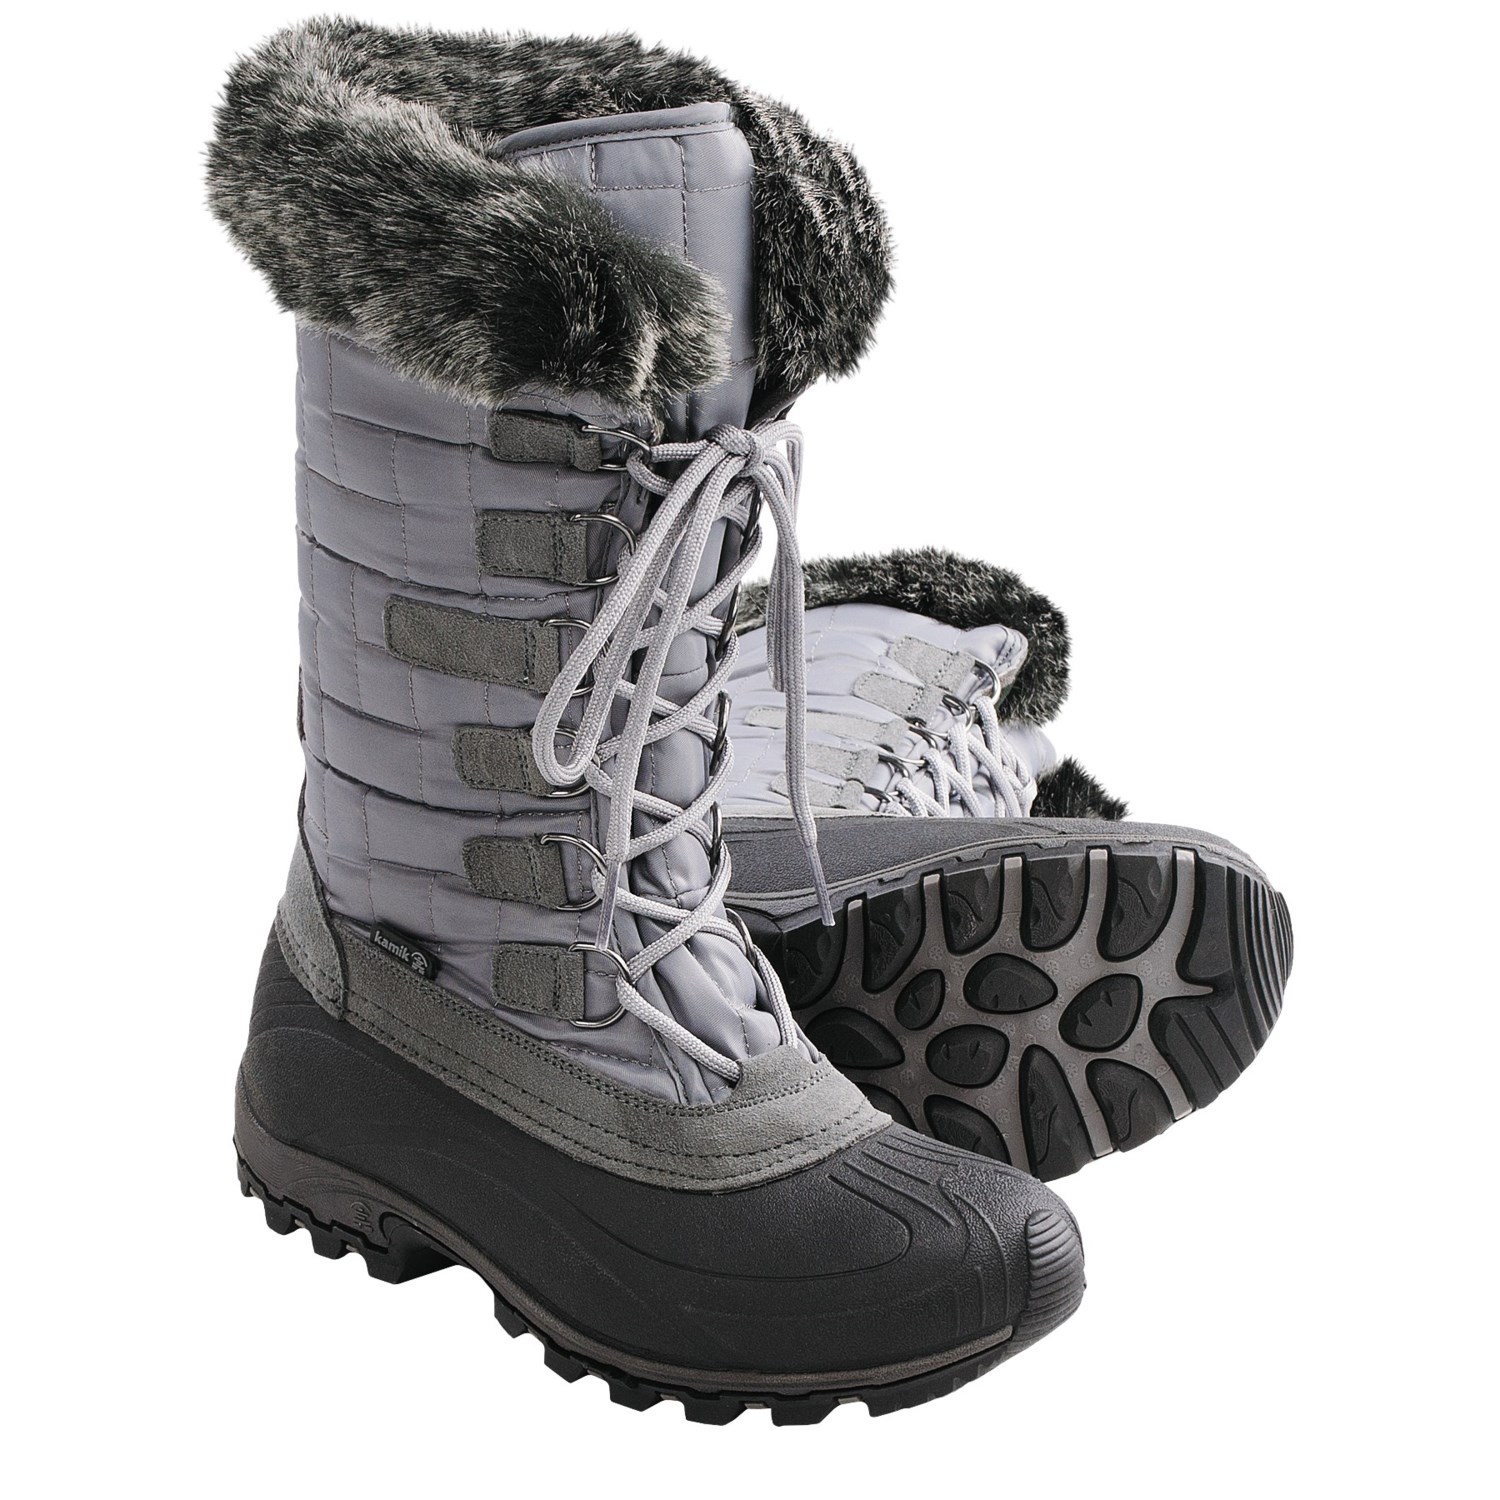 Customer Reviews of Kamik Scarlet 3 Snow Boots - Insulated (For Women)